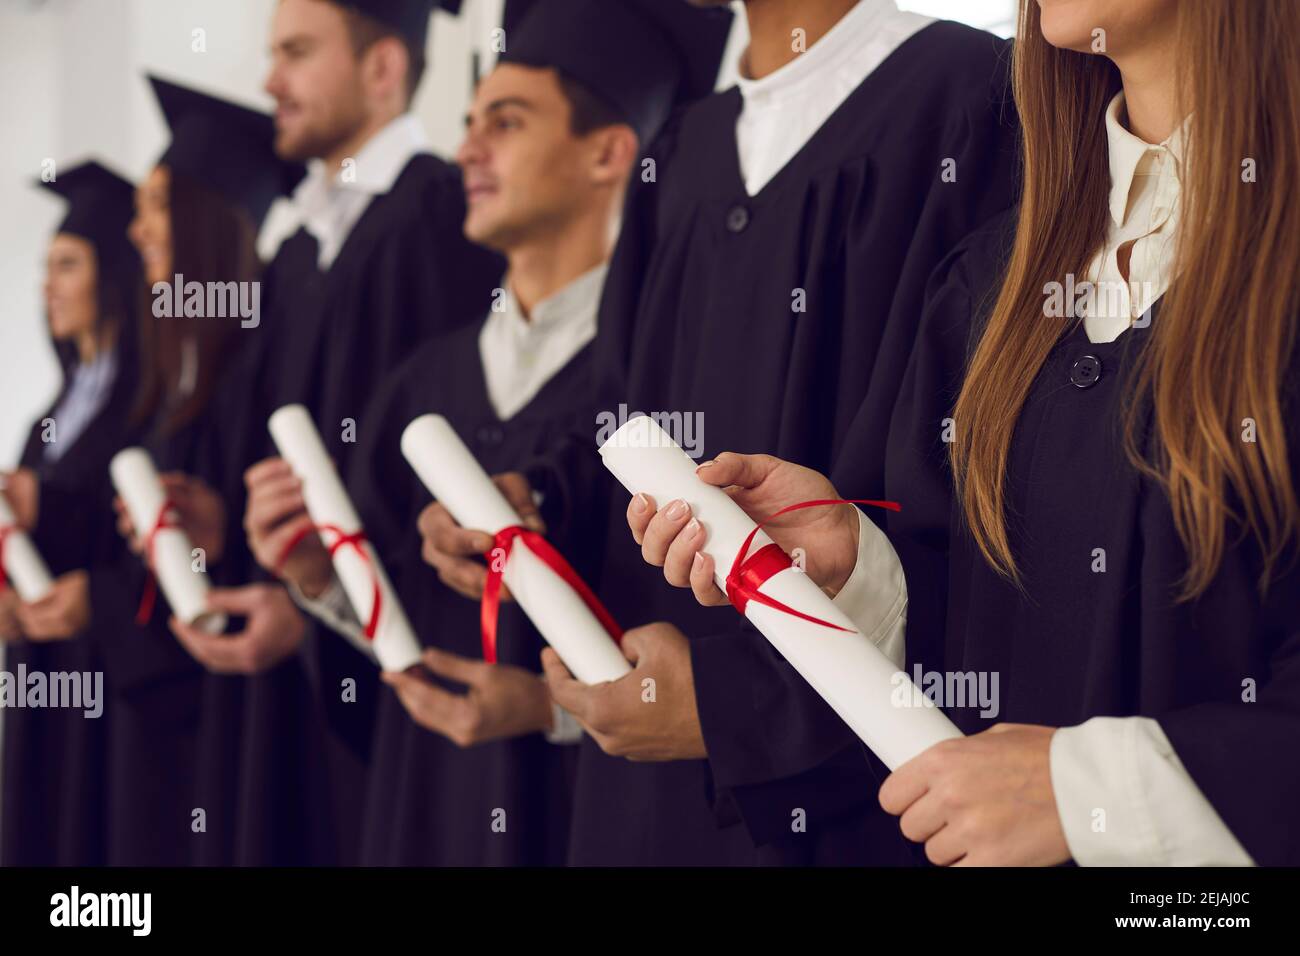 Row of graduates in black caps and gowns holding diplomas at graduation ceremony Stock Photo